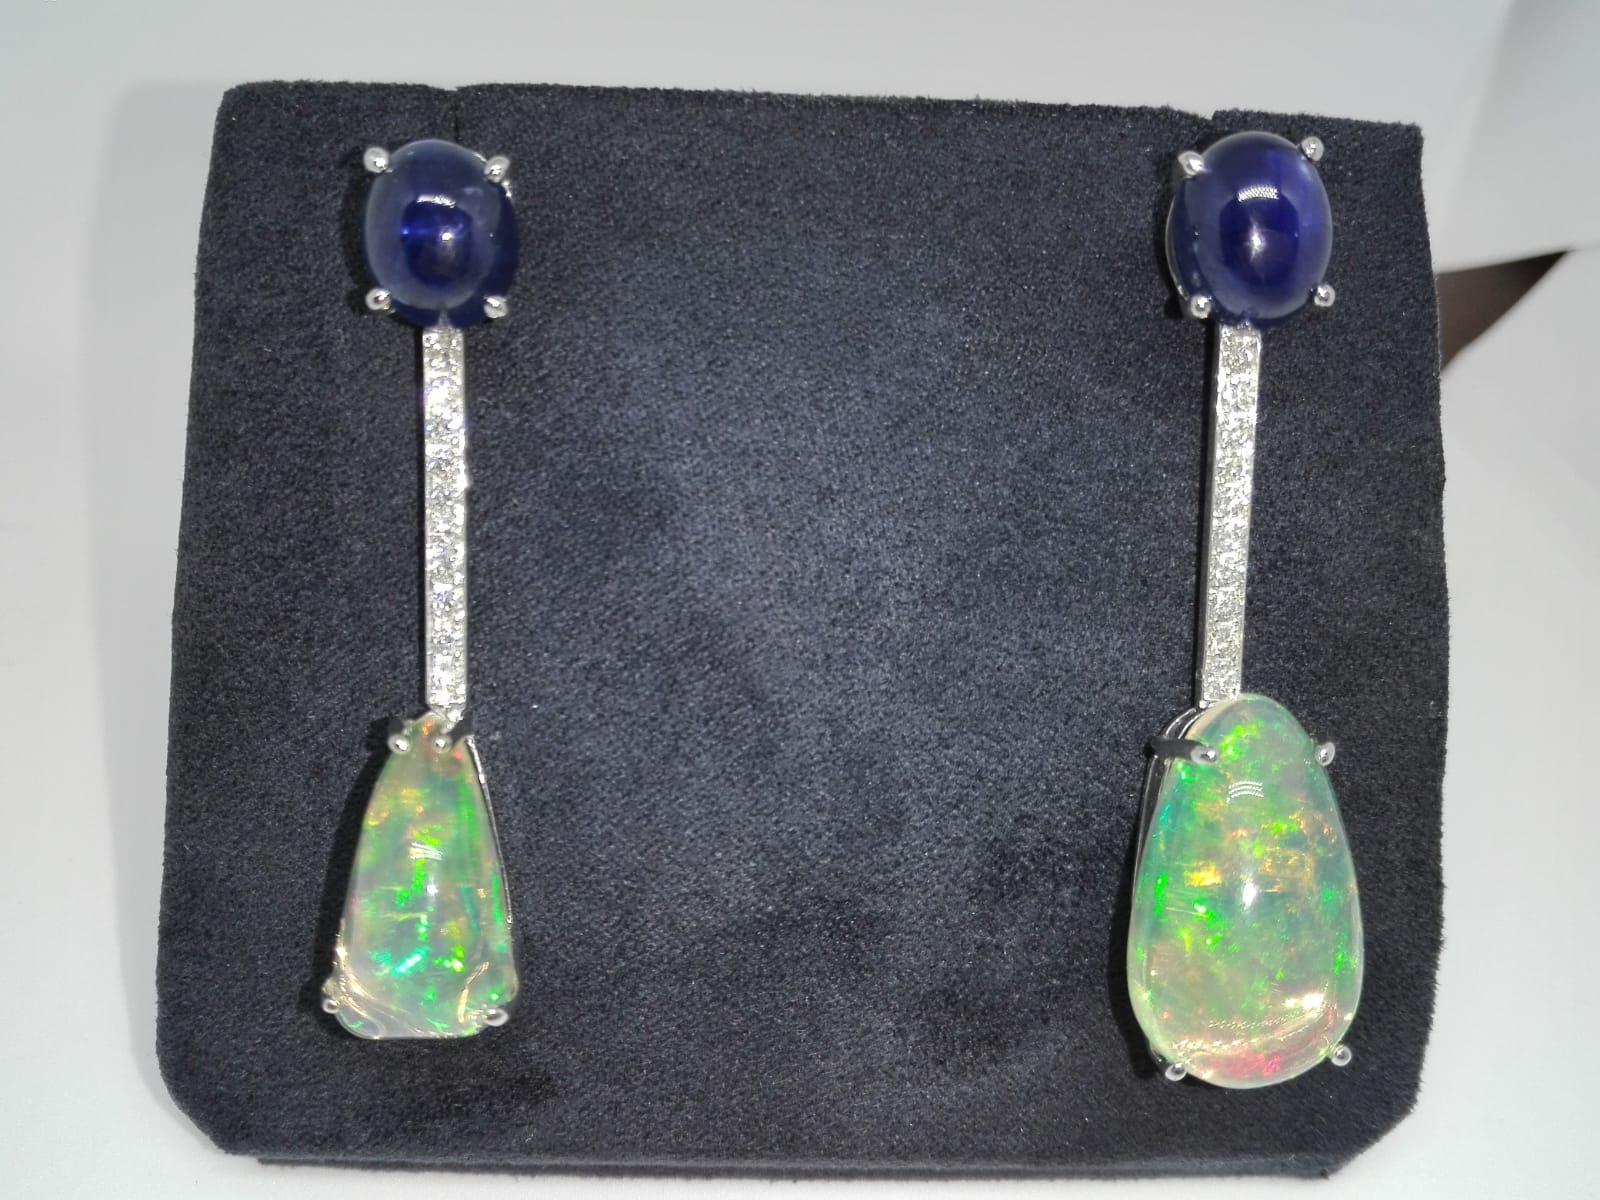 Earrings in white gold, cabochon sapphires, Ethiopian opals and brilliant cut diamonds